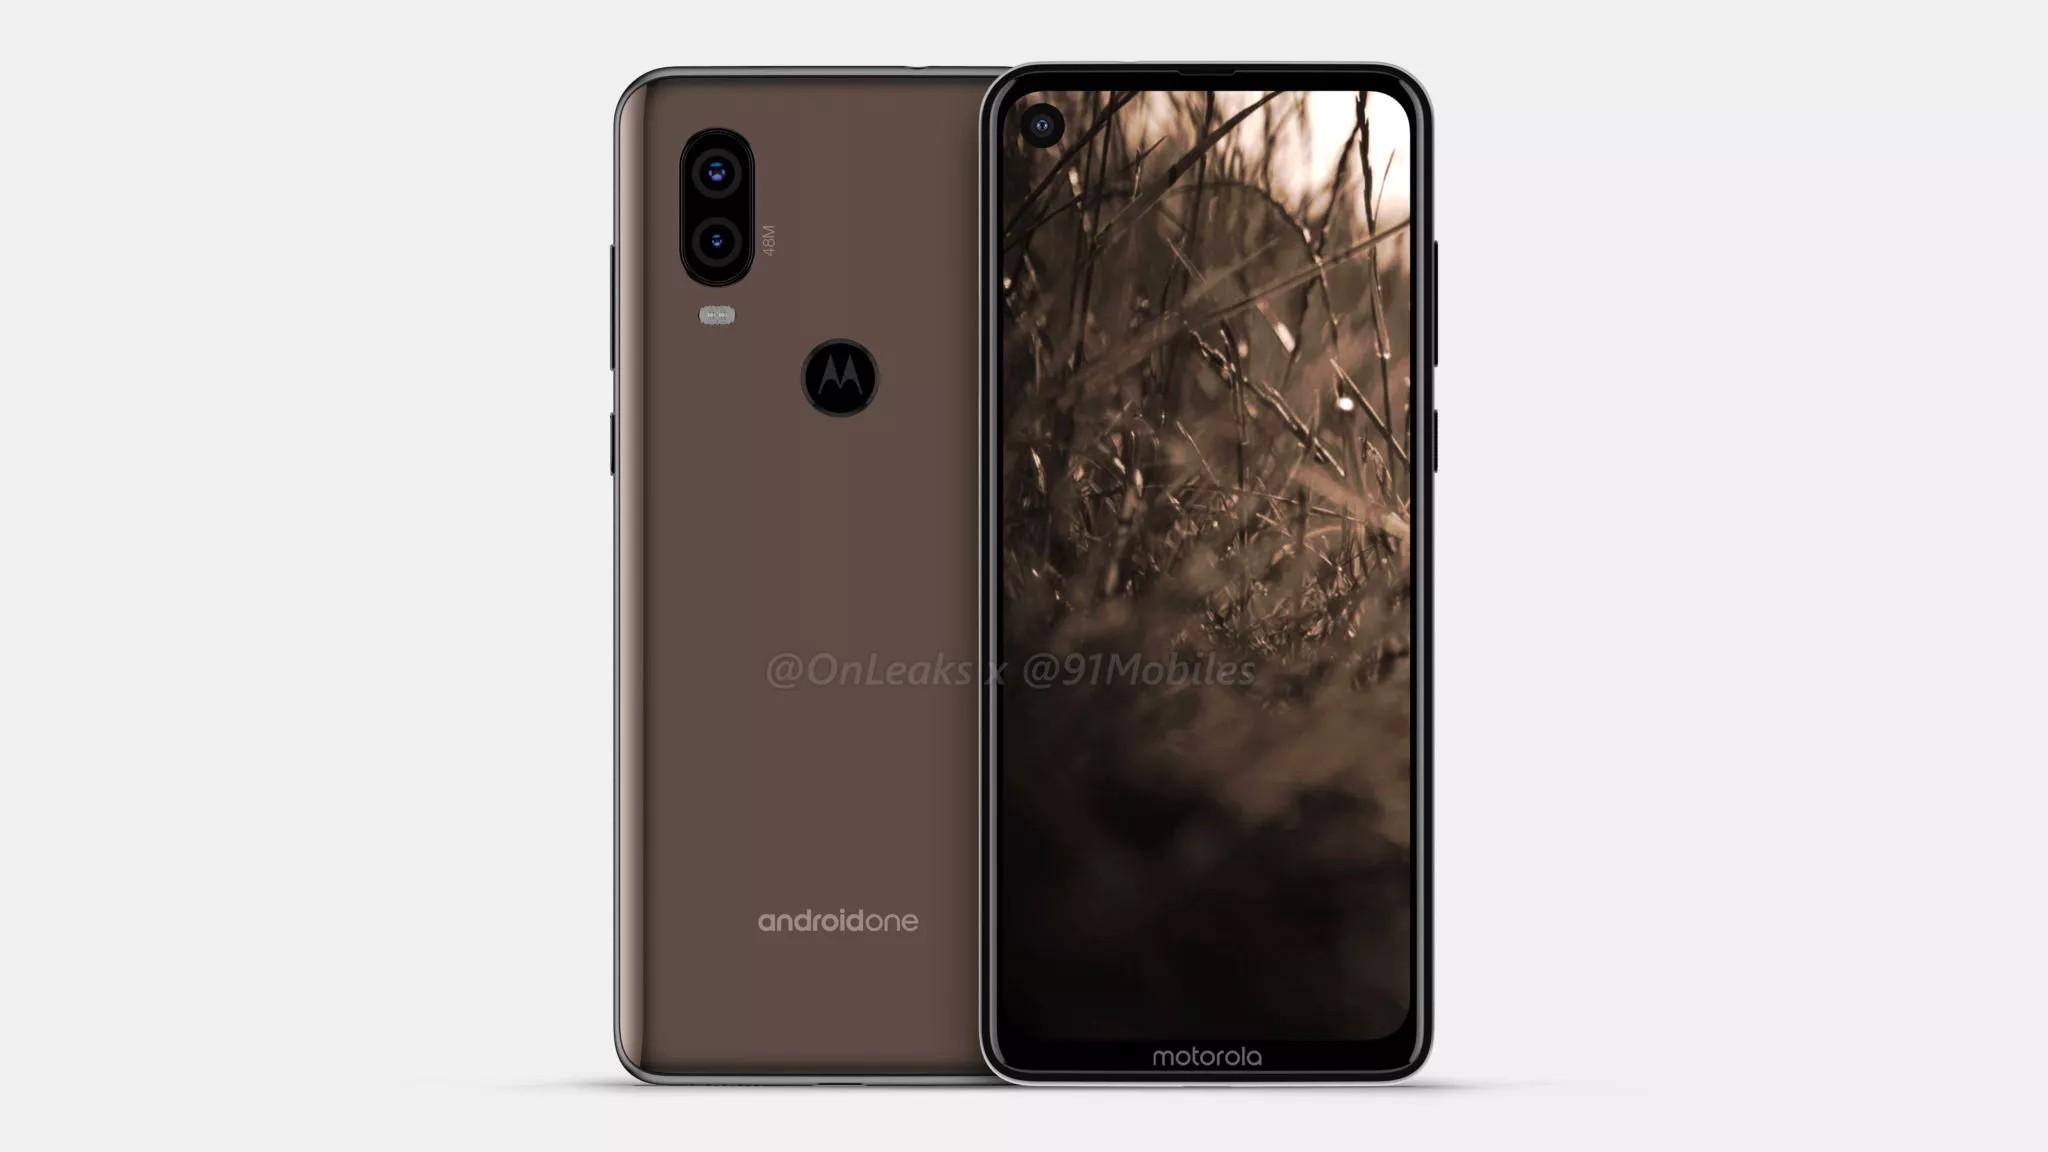 Motorola P40 specifications and design leaked